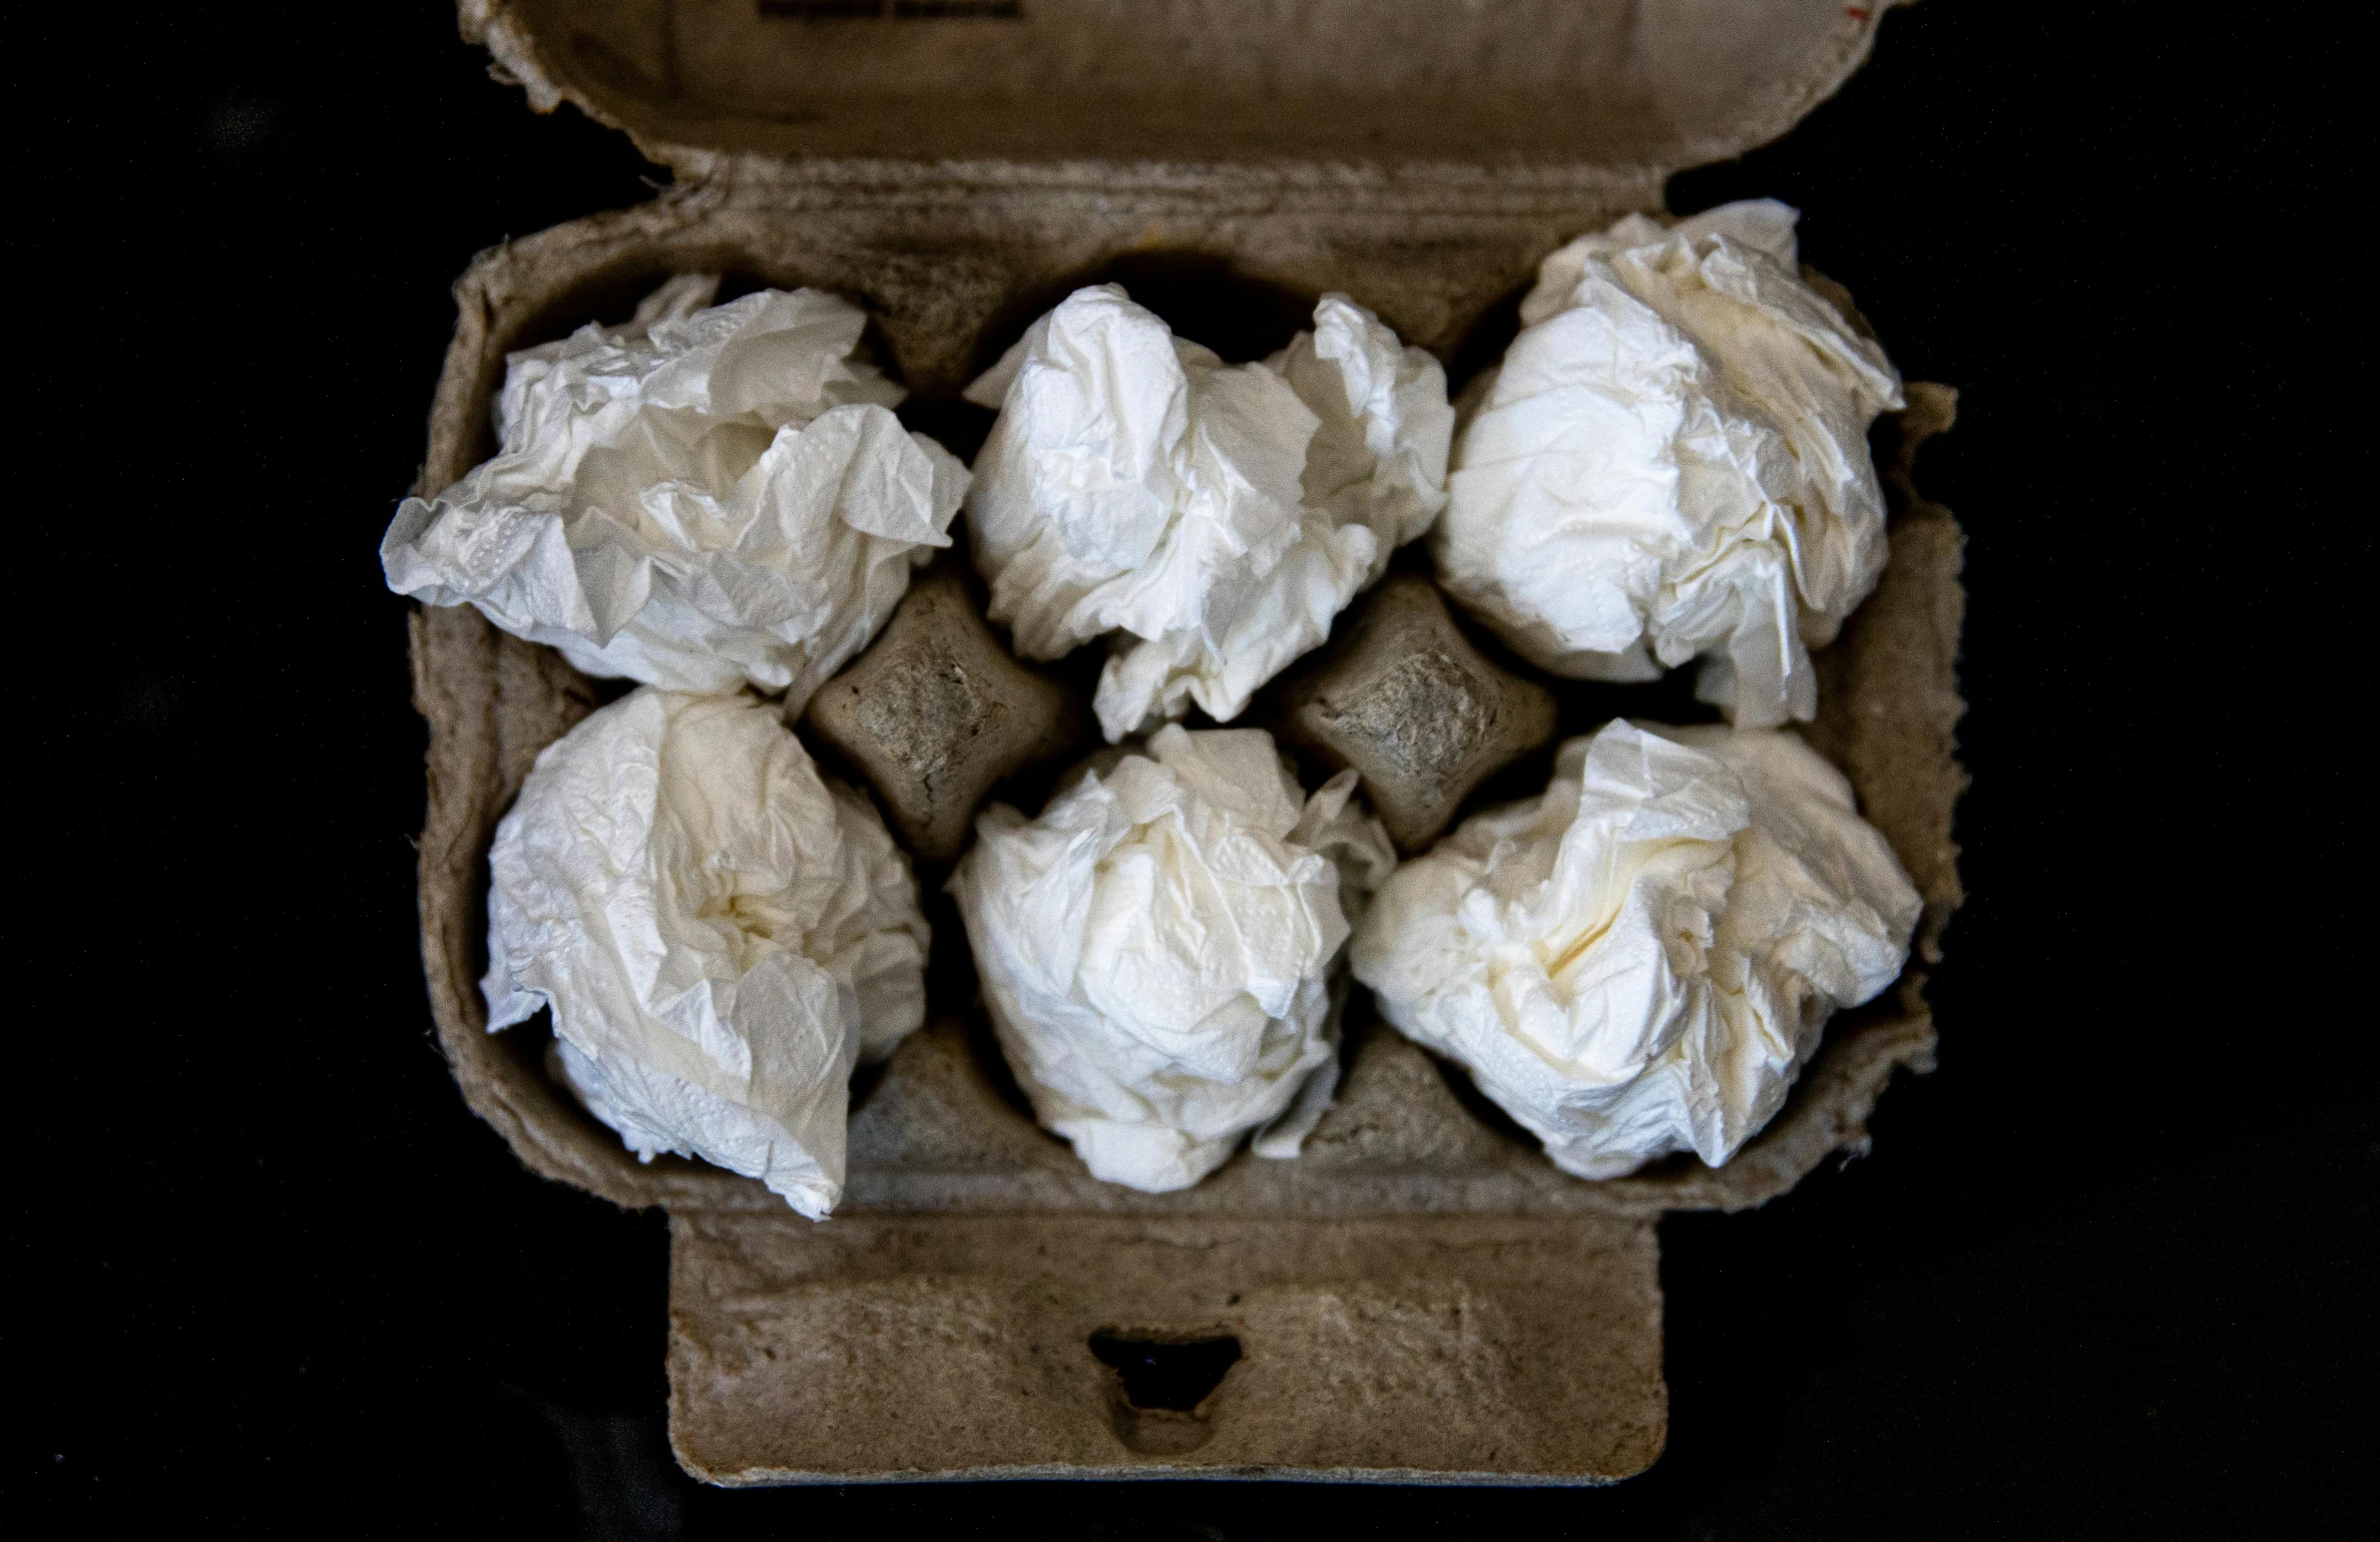 a carton filled with eggs sitting on top of a table, in front of a black background, lots of white cotton, six pack, parchment paper